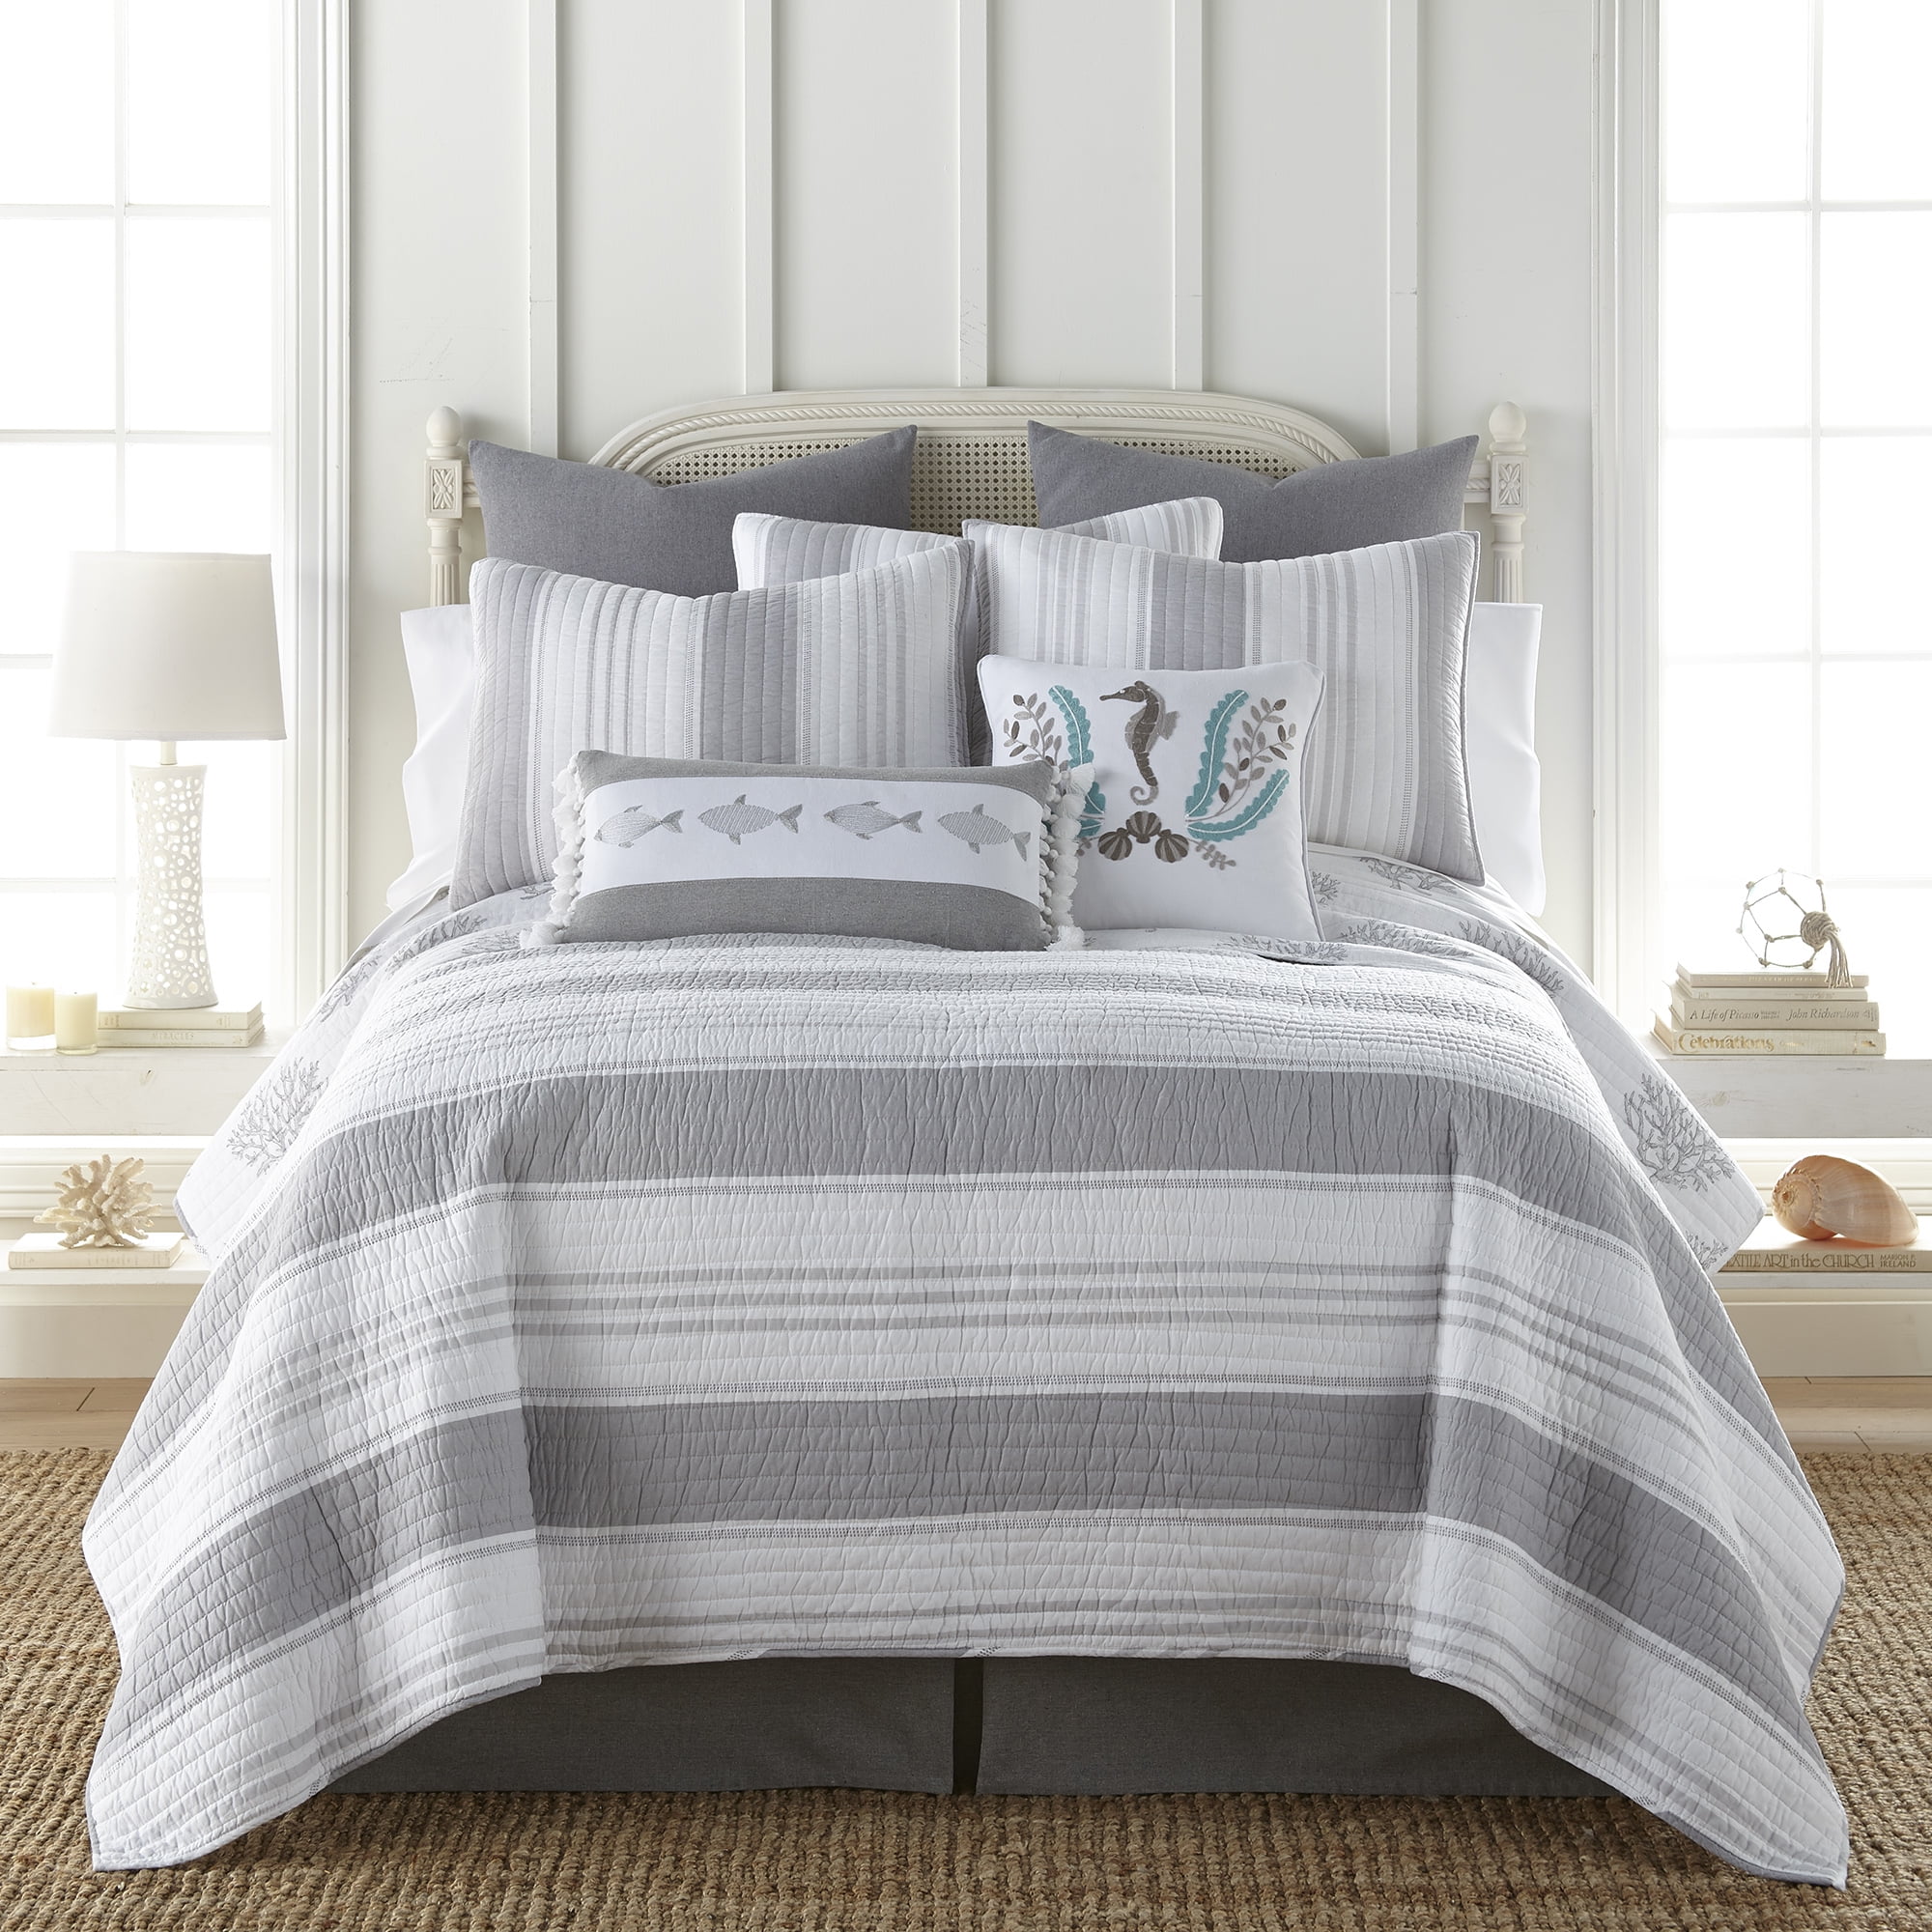 Details about   Ice Grey and White Hamptons Queen Duvet Doona Bed Quilt Cover Pillow Slips Set